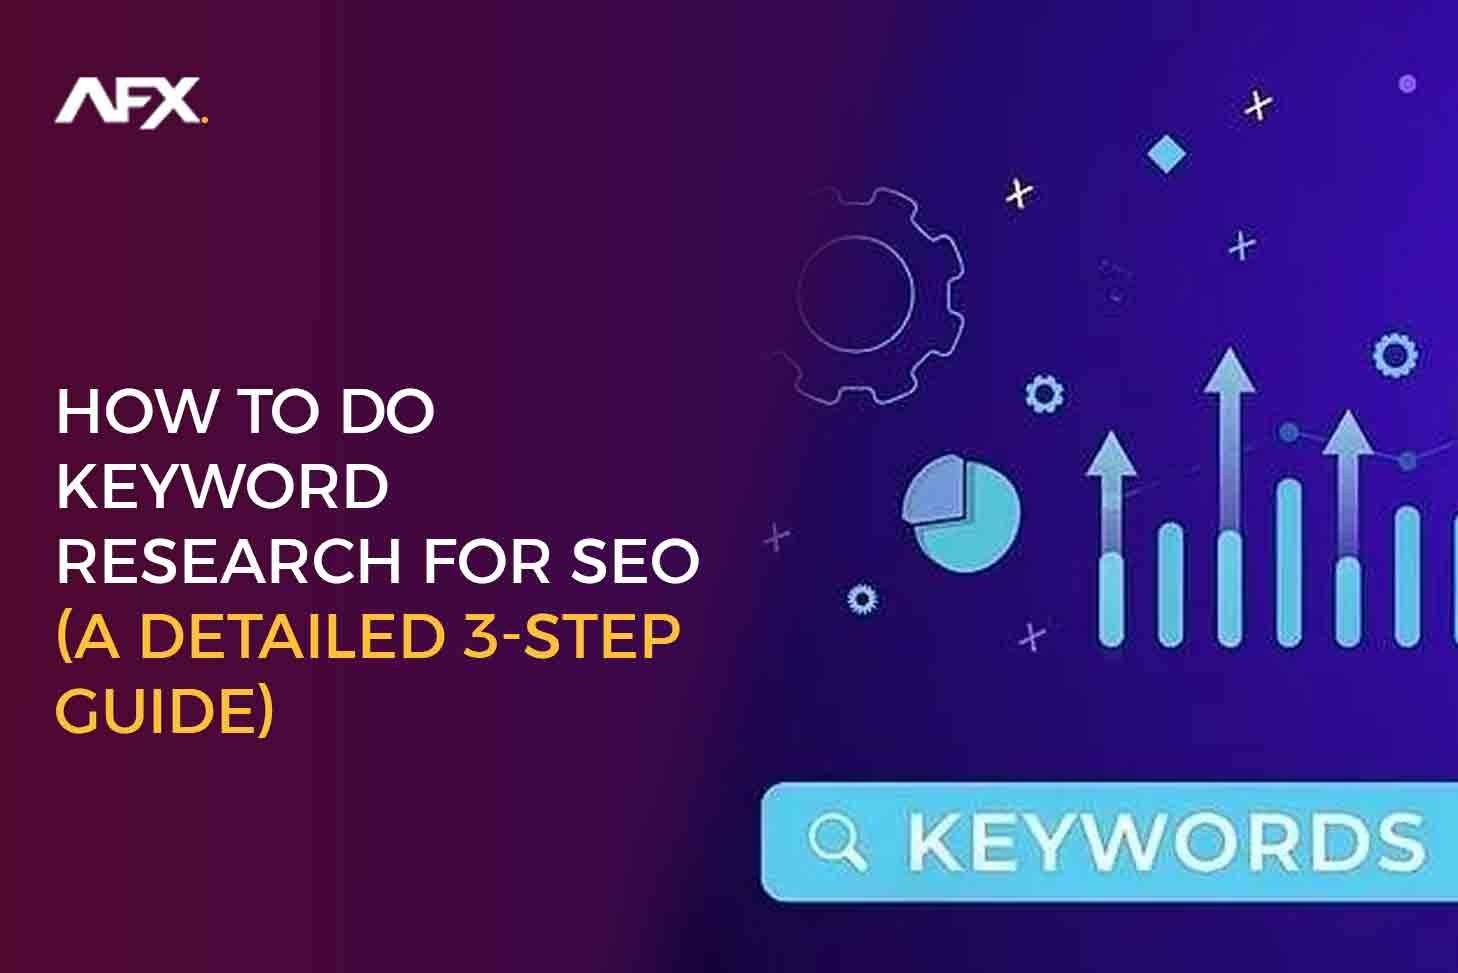 3 step guide for keyword research